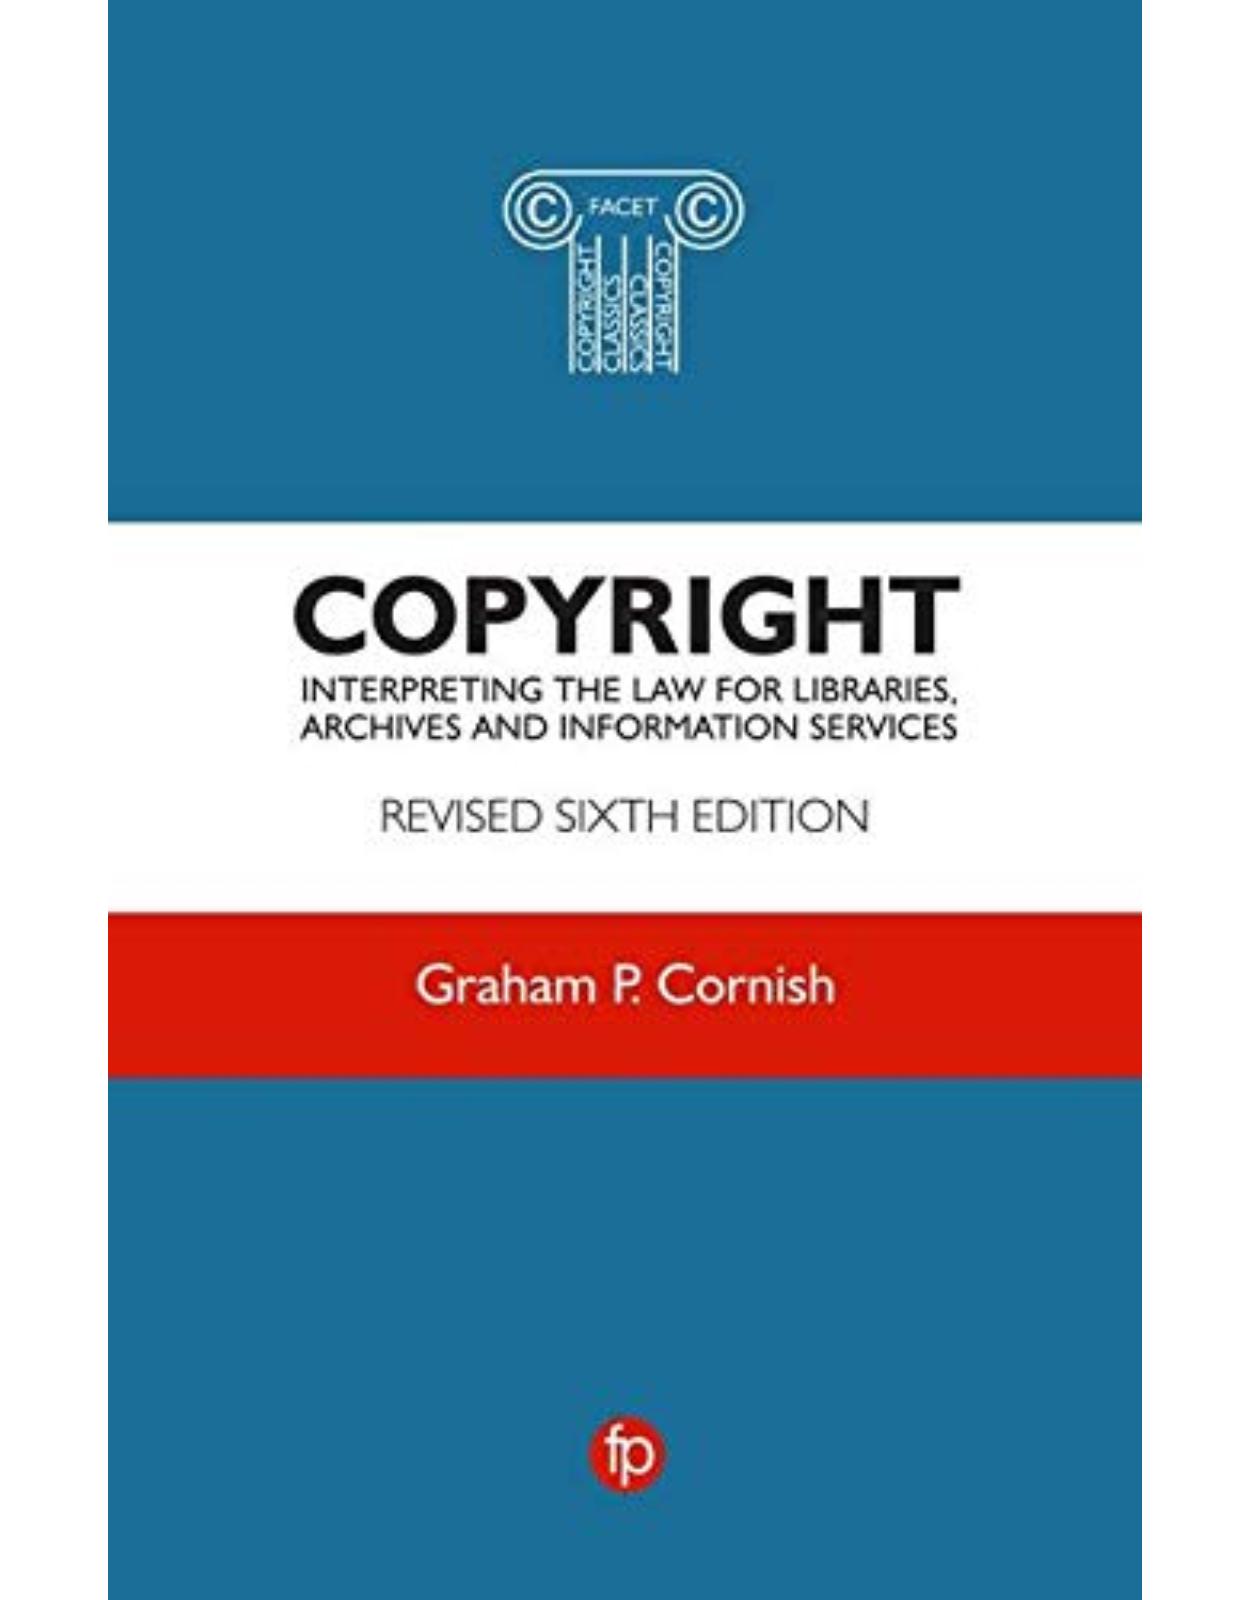 Copyright, revised 6th edtion Interpreting the law for libraries, archives and information services 